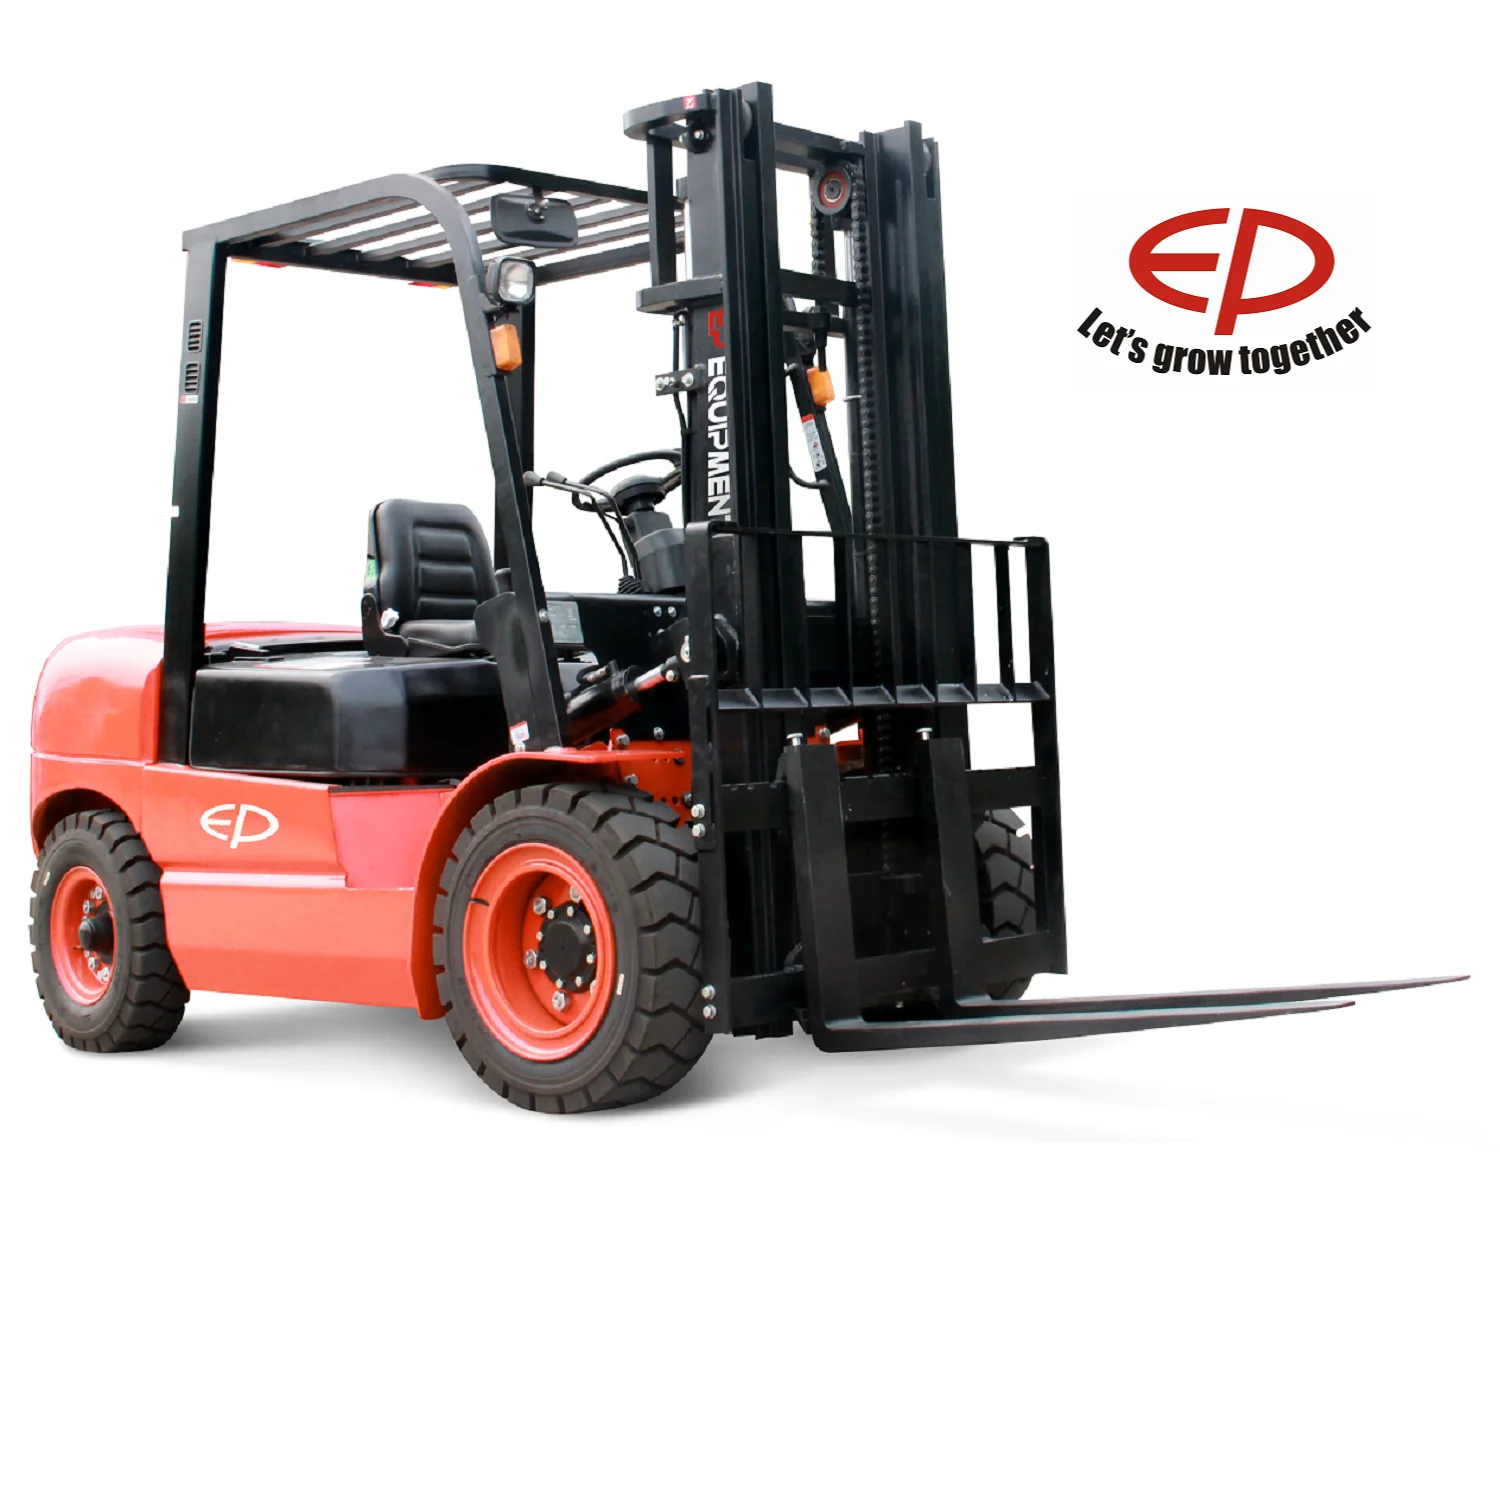 Ep 4 5 Ton Japanese Engine Internal Combustion Diesel Forklift Solid Tyre Optional Cpcd35t8 View Solid Tyre Diesel Forklift Ep Product Details From Zhejiang E P Imp Exp Co Ltd On Alibaba Com